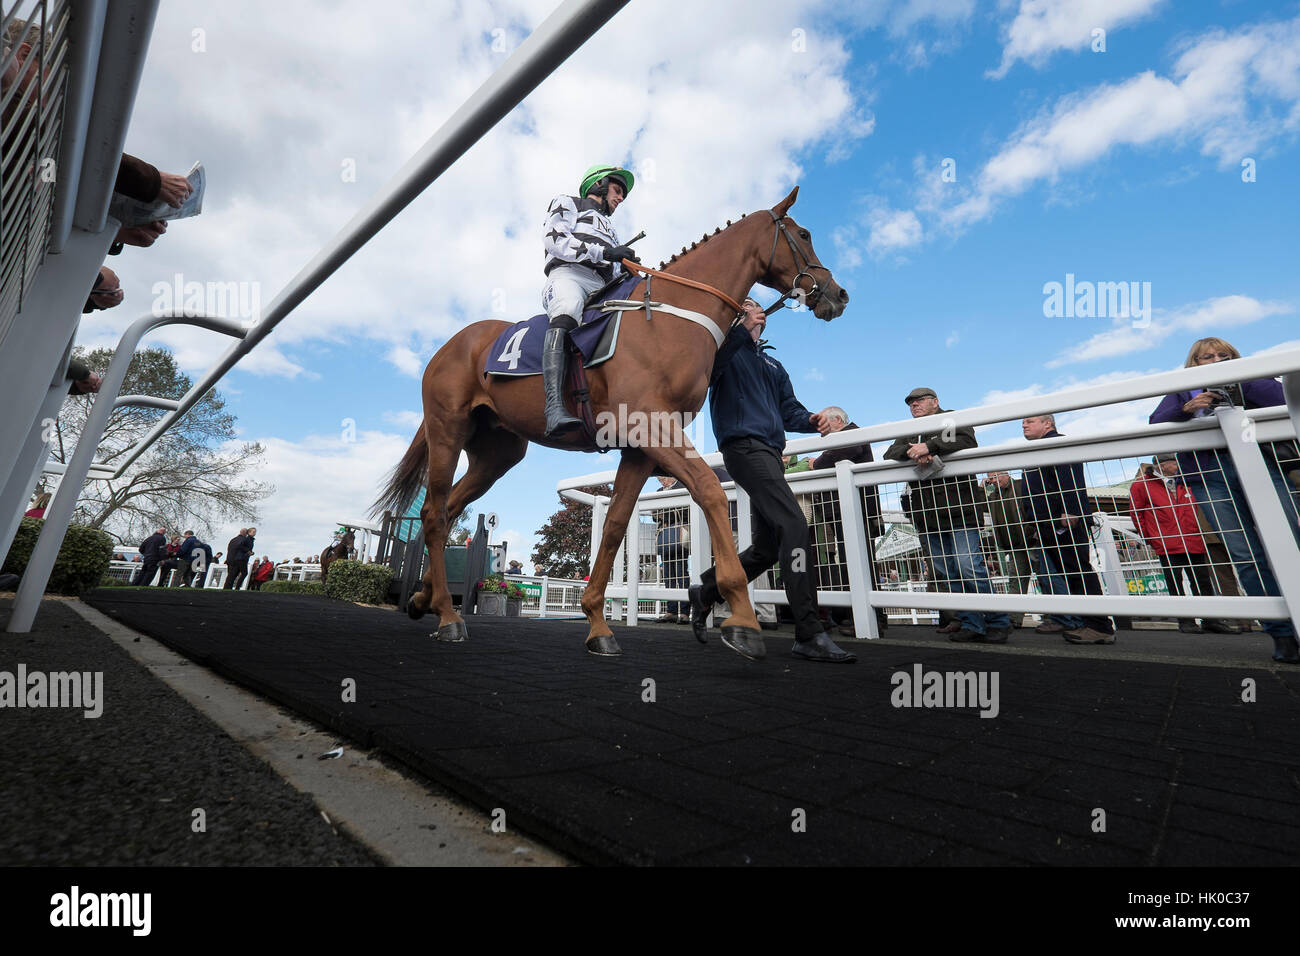 Race horse and rider, low angle Stock Photo